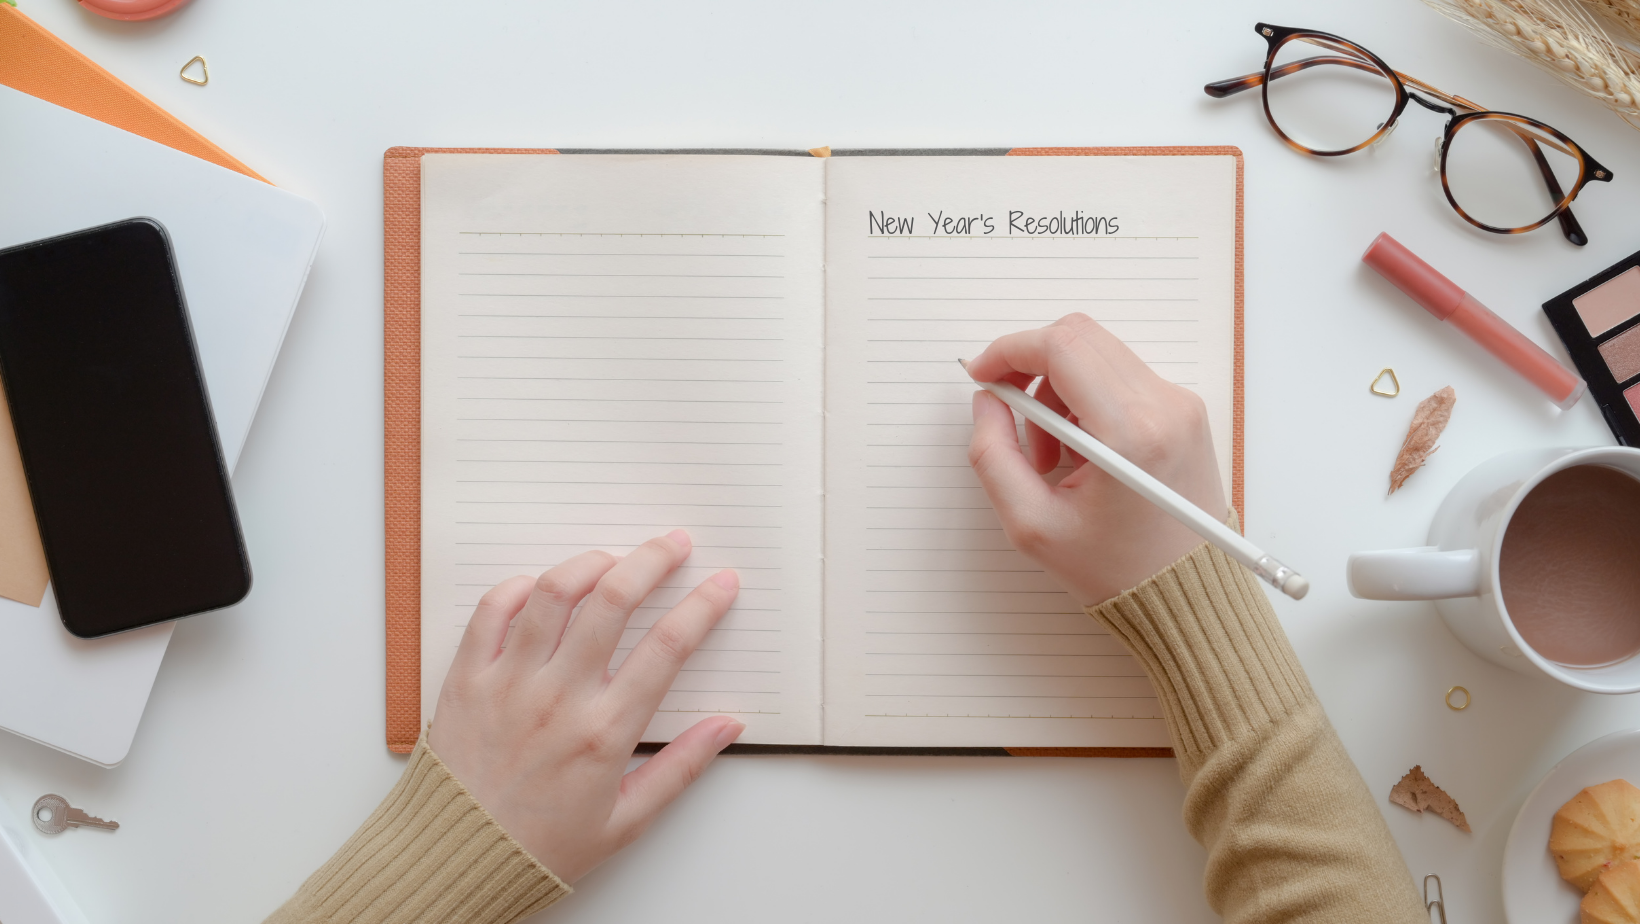 6 New Year’s resolutions worth keeping